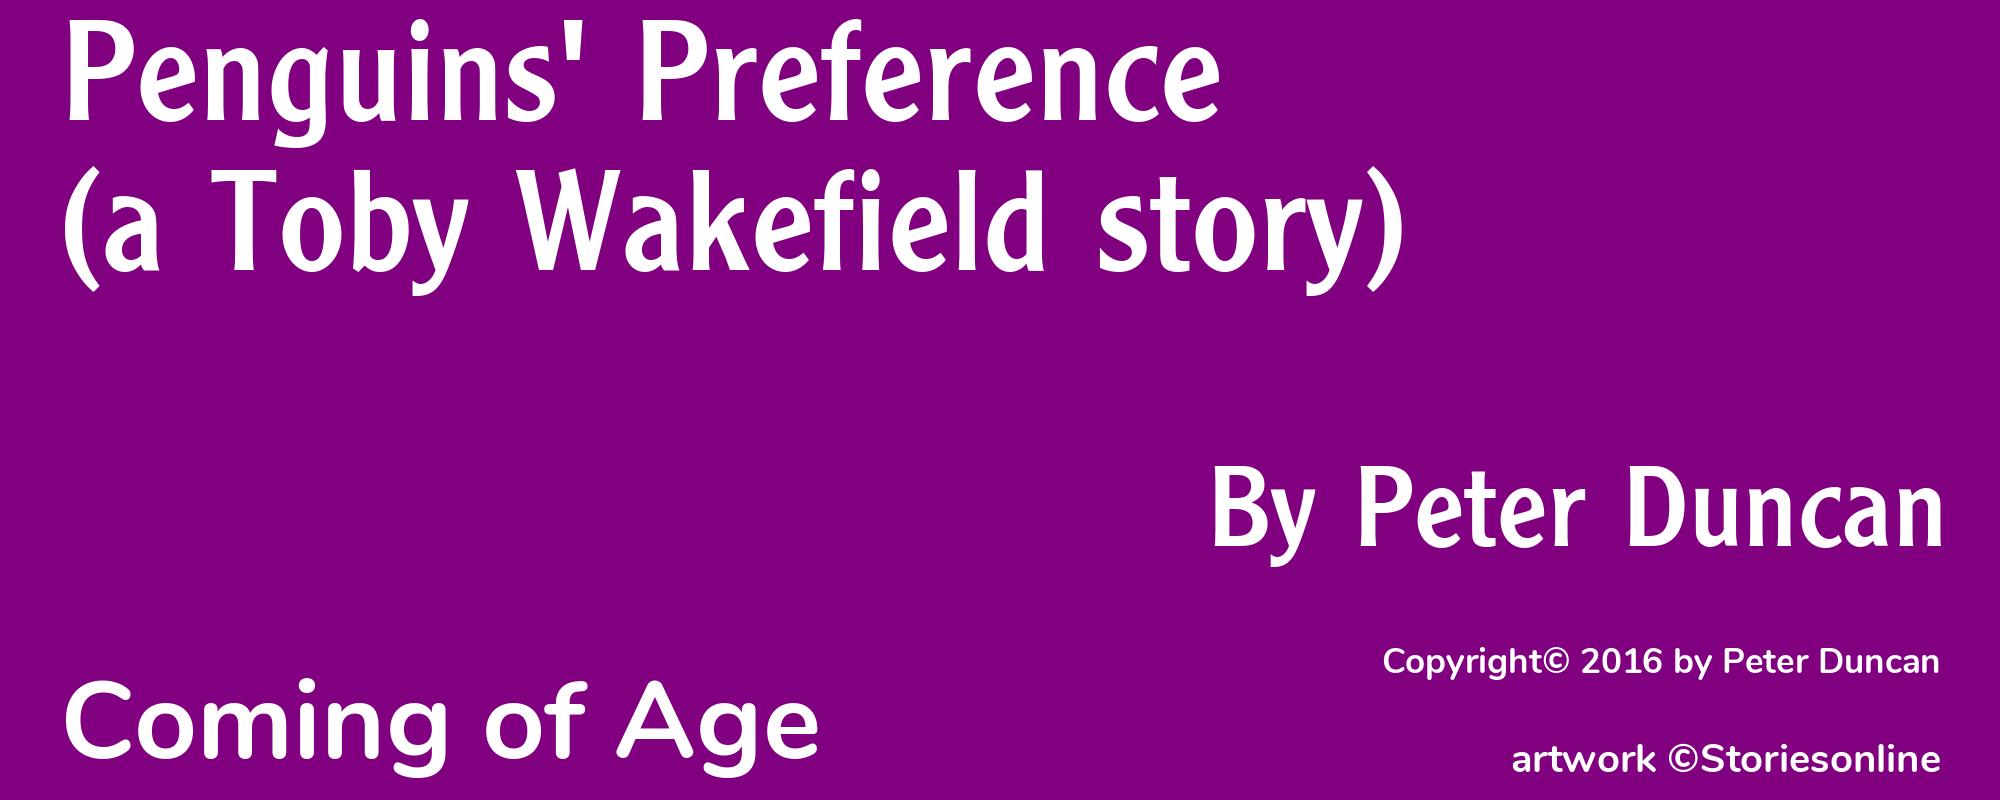 Penguins' Preference (a Toby Wakefield story) - Cover